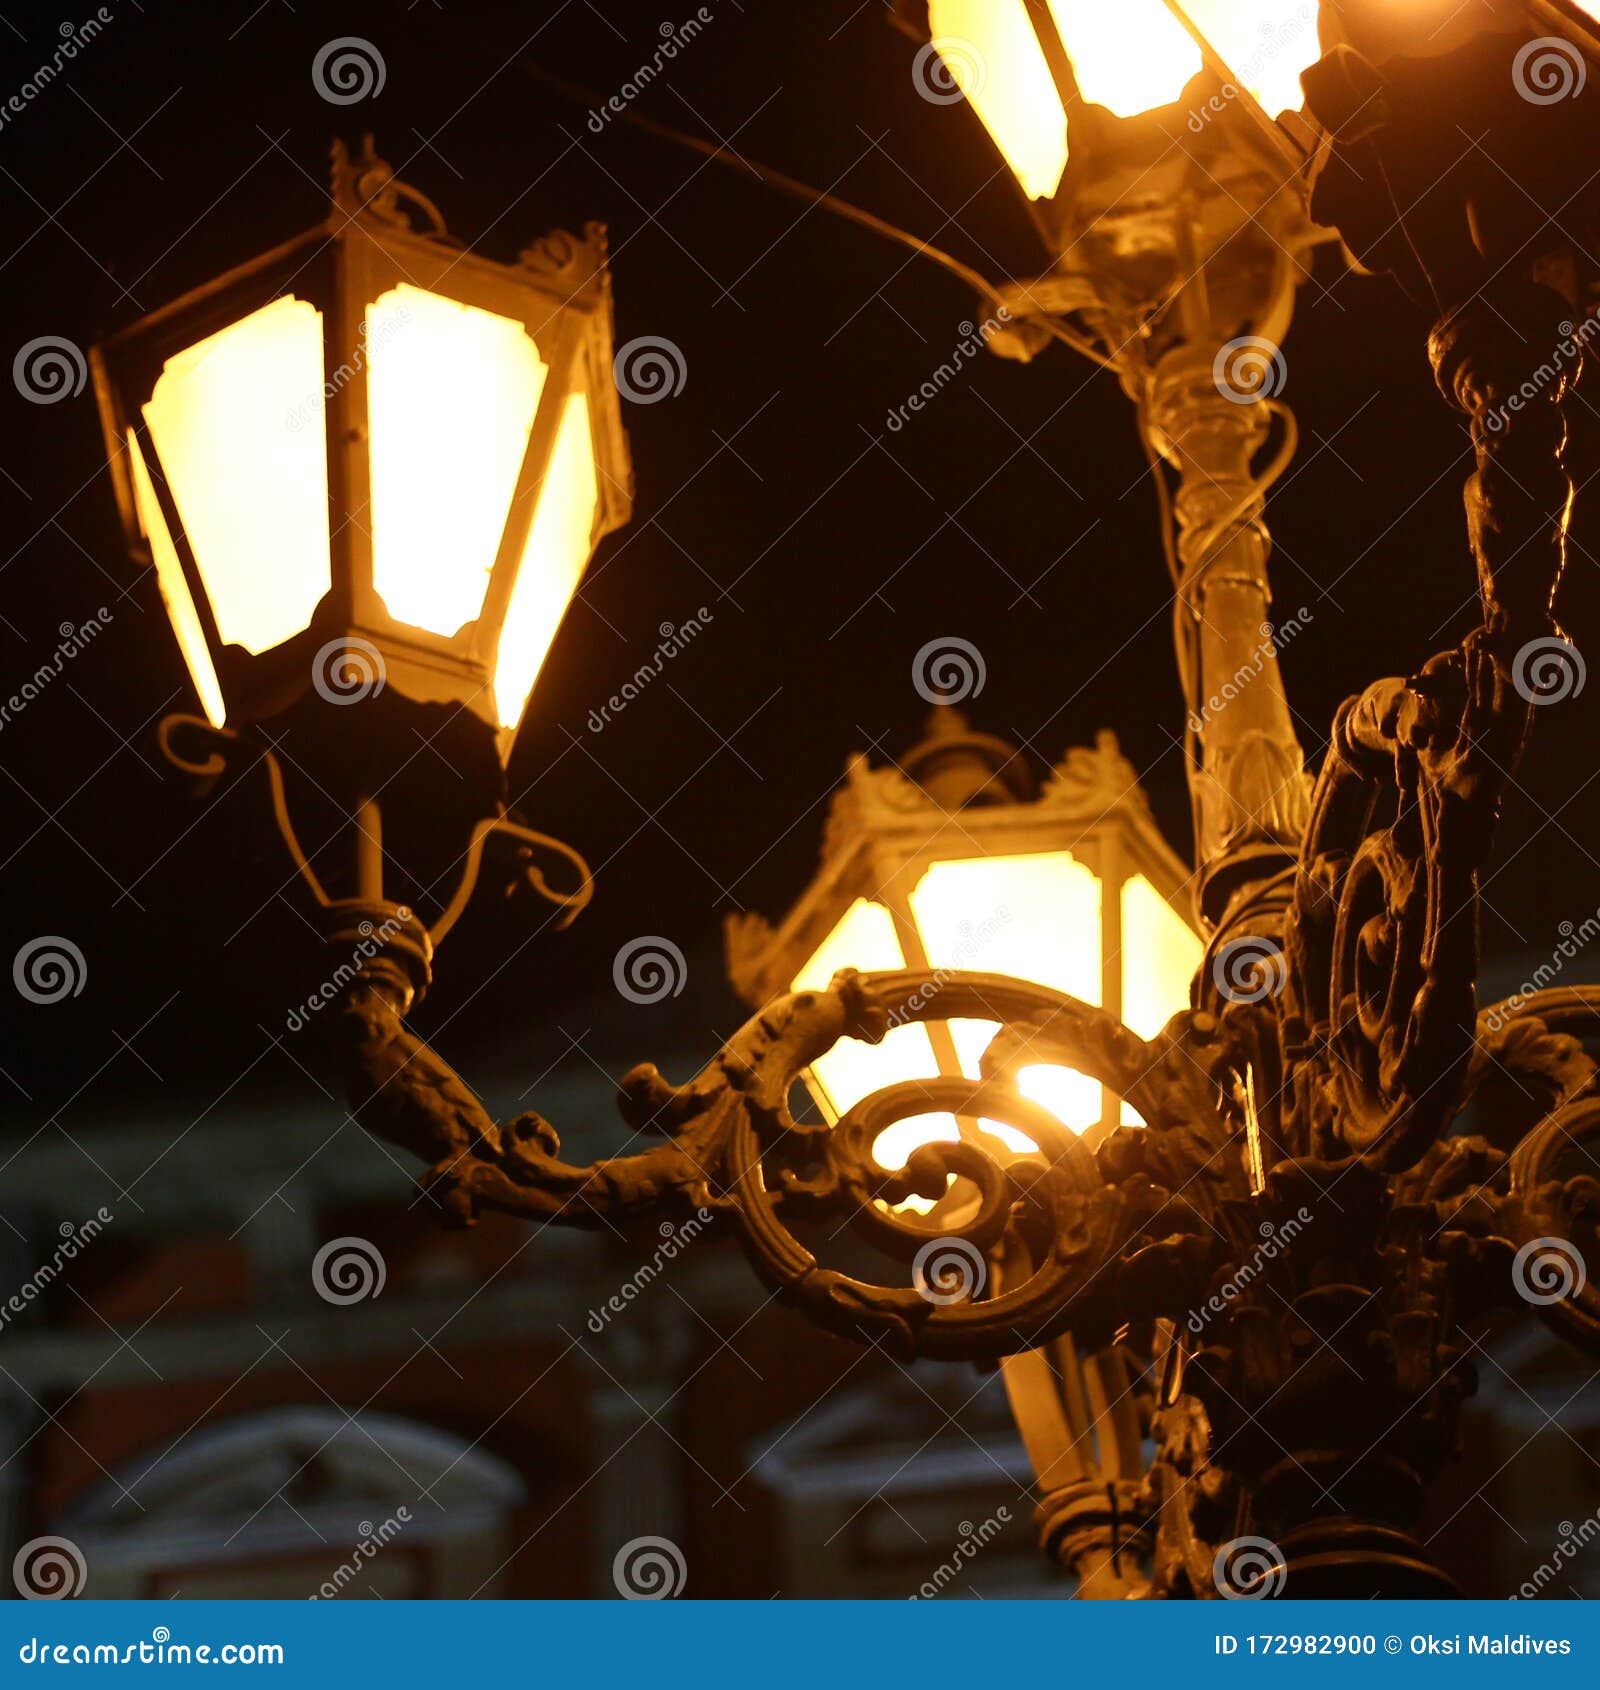 lantern in the old citycenter